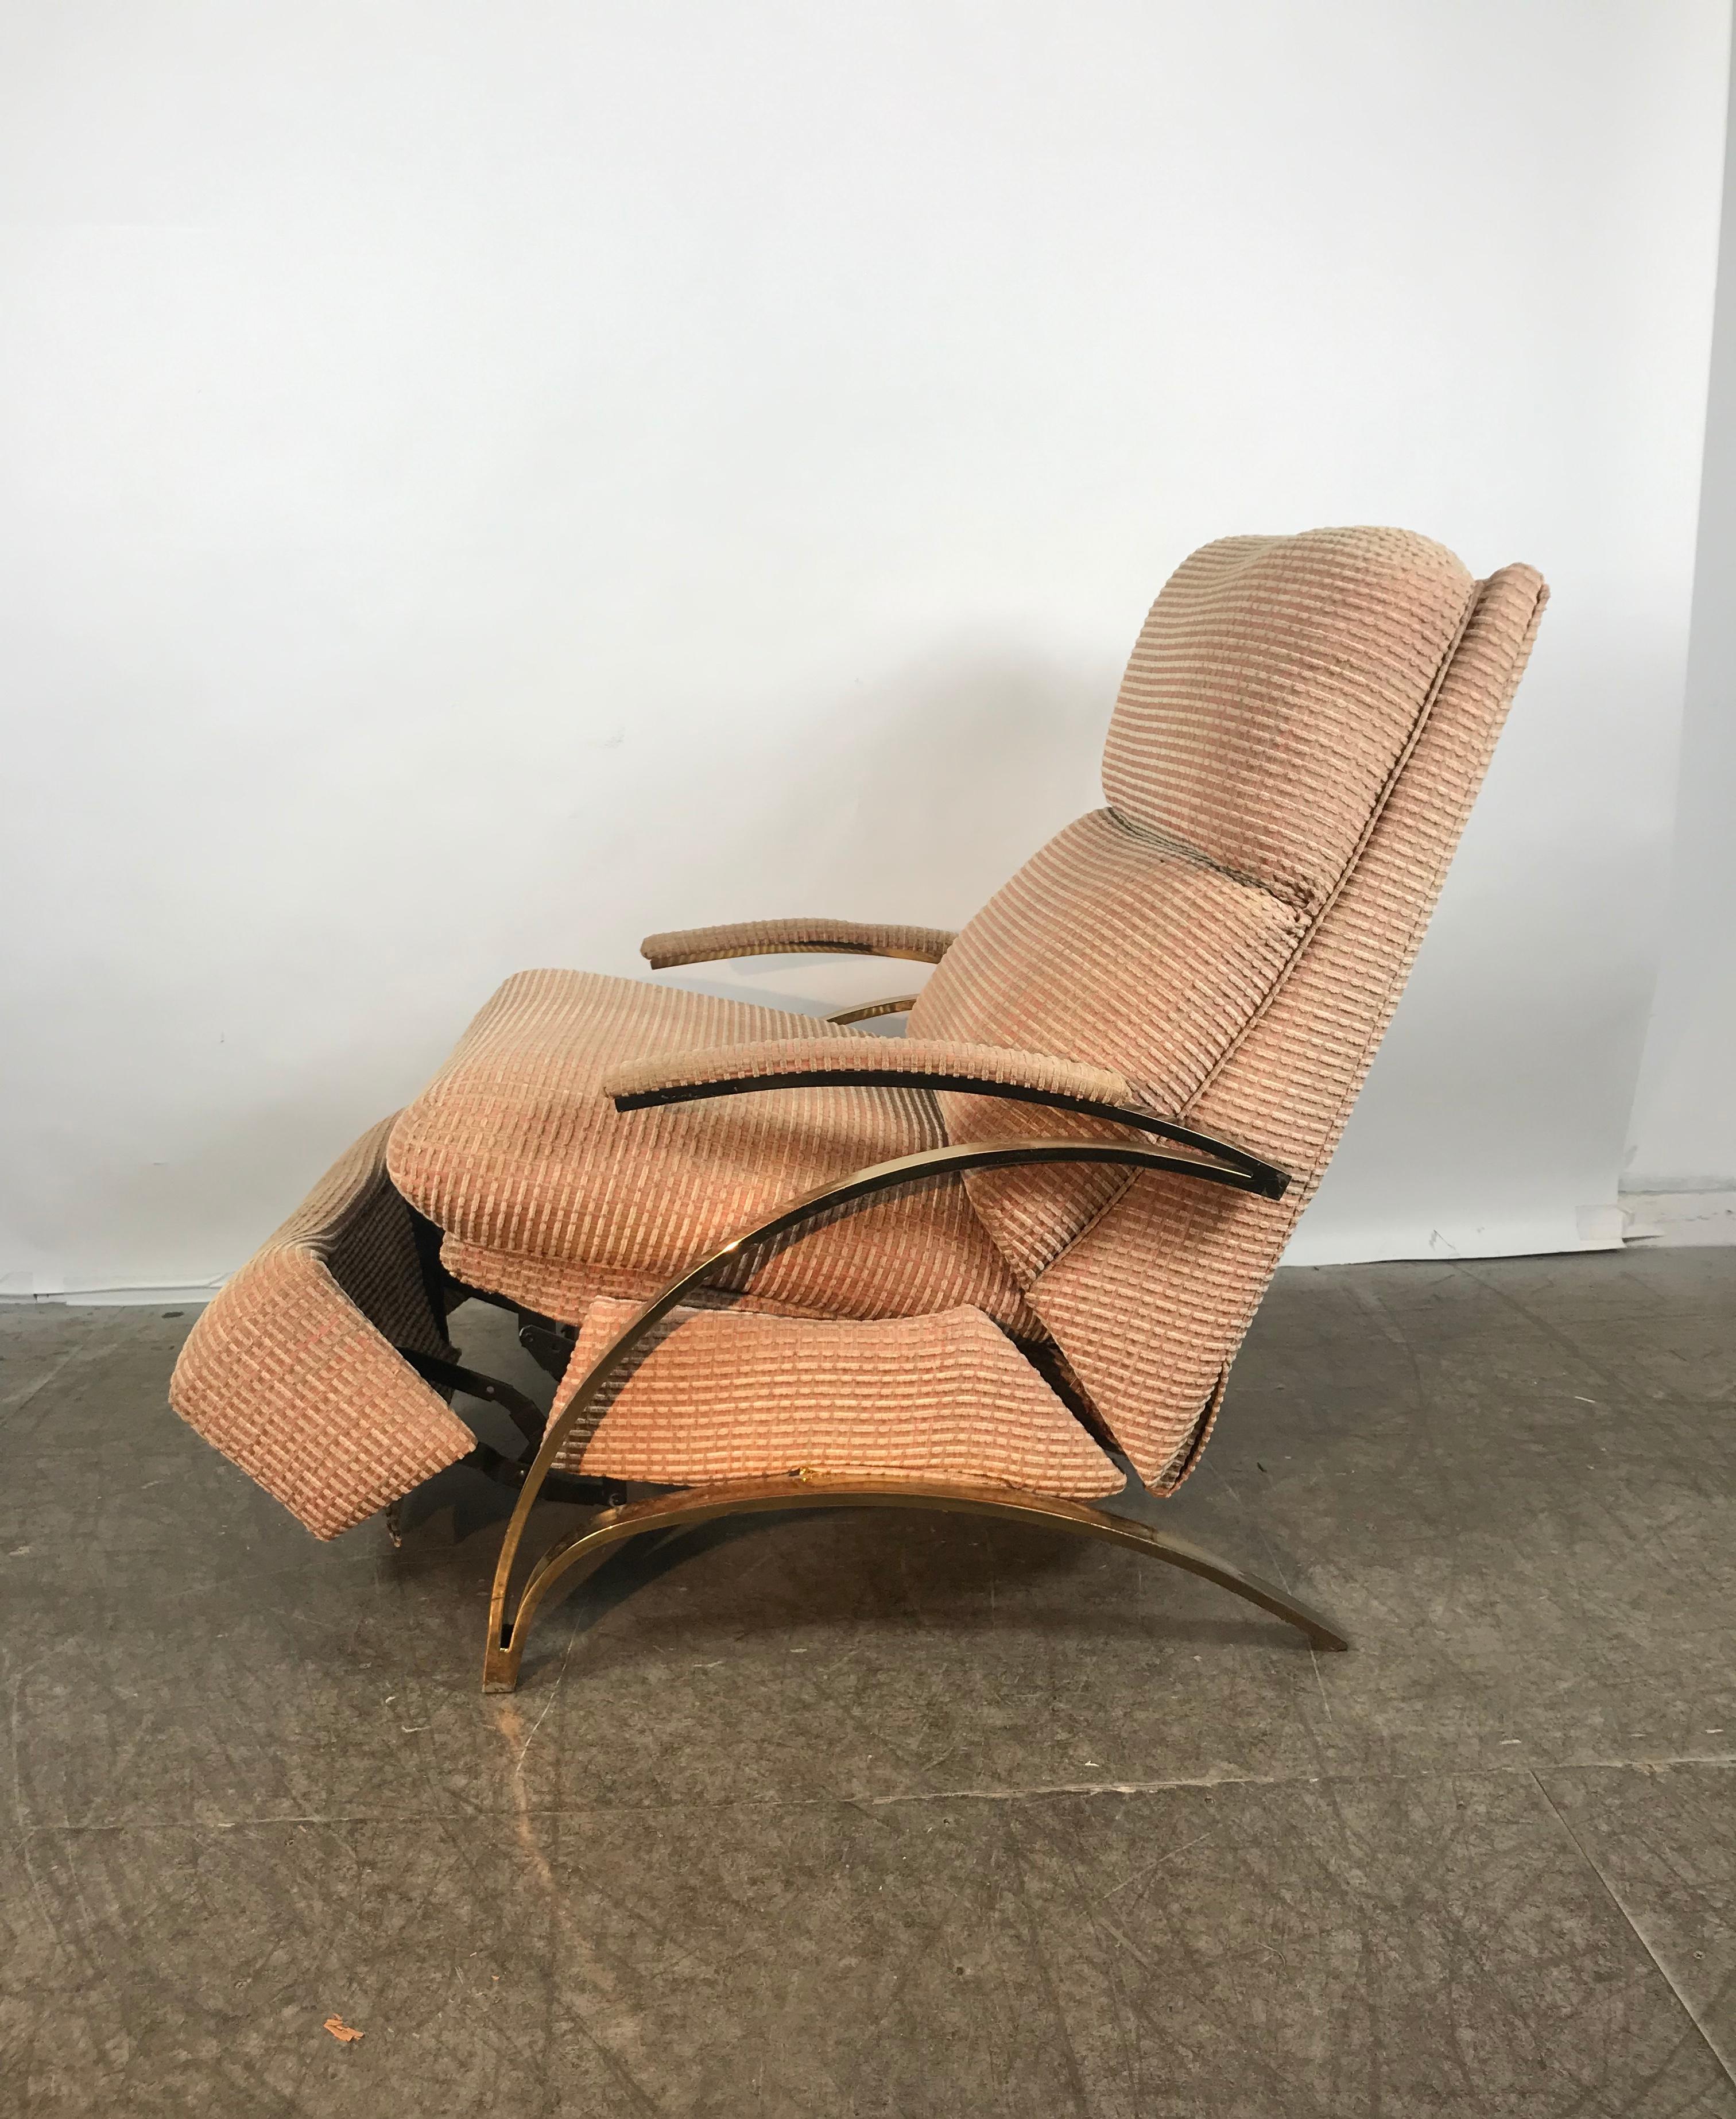 Stunning brass cantilever recliner lounge chair reminiscent of the designs
by Milo Baughman for Thayer Coggin, amazing quality, very heavy, nice original condition. Retains original fabric. Extremely comfortable. When fully reclined 66 by 28 inch